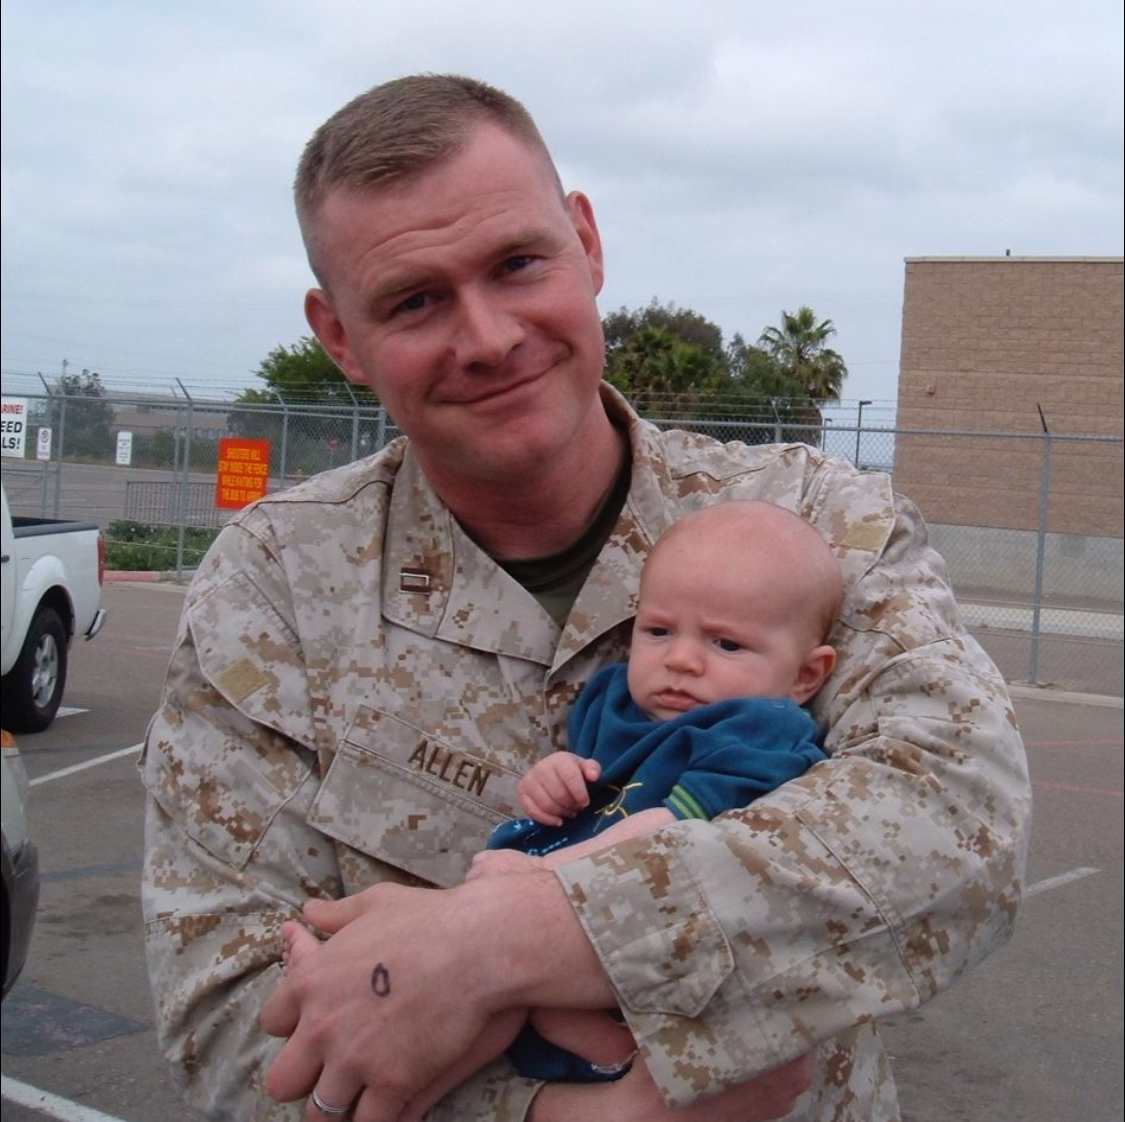 Newborn Jameson Allen, Molly’s brother is cradled by his father, Marine Corps Commanding Officer, Ryan Allen. Molly and her siblings have moved over eight times. She says “…If I weren’t a military kid, I would’ve missed out on so many life changing experiences…The struggles are immense, but so are the life lessons.”